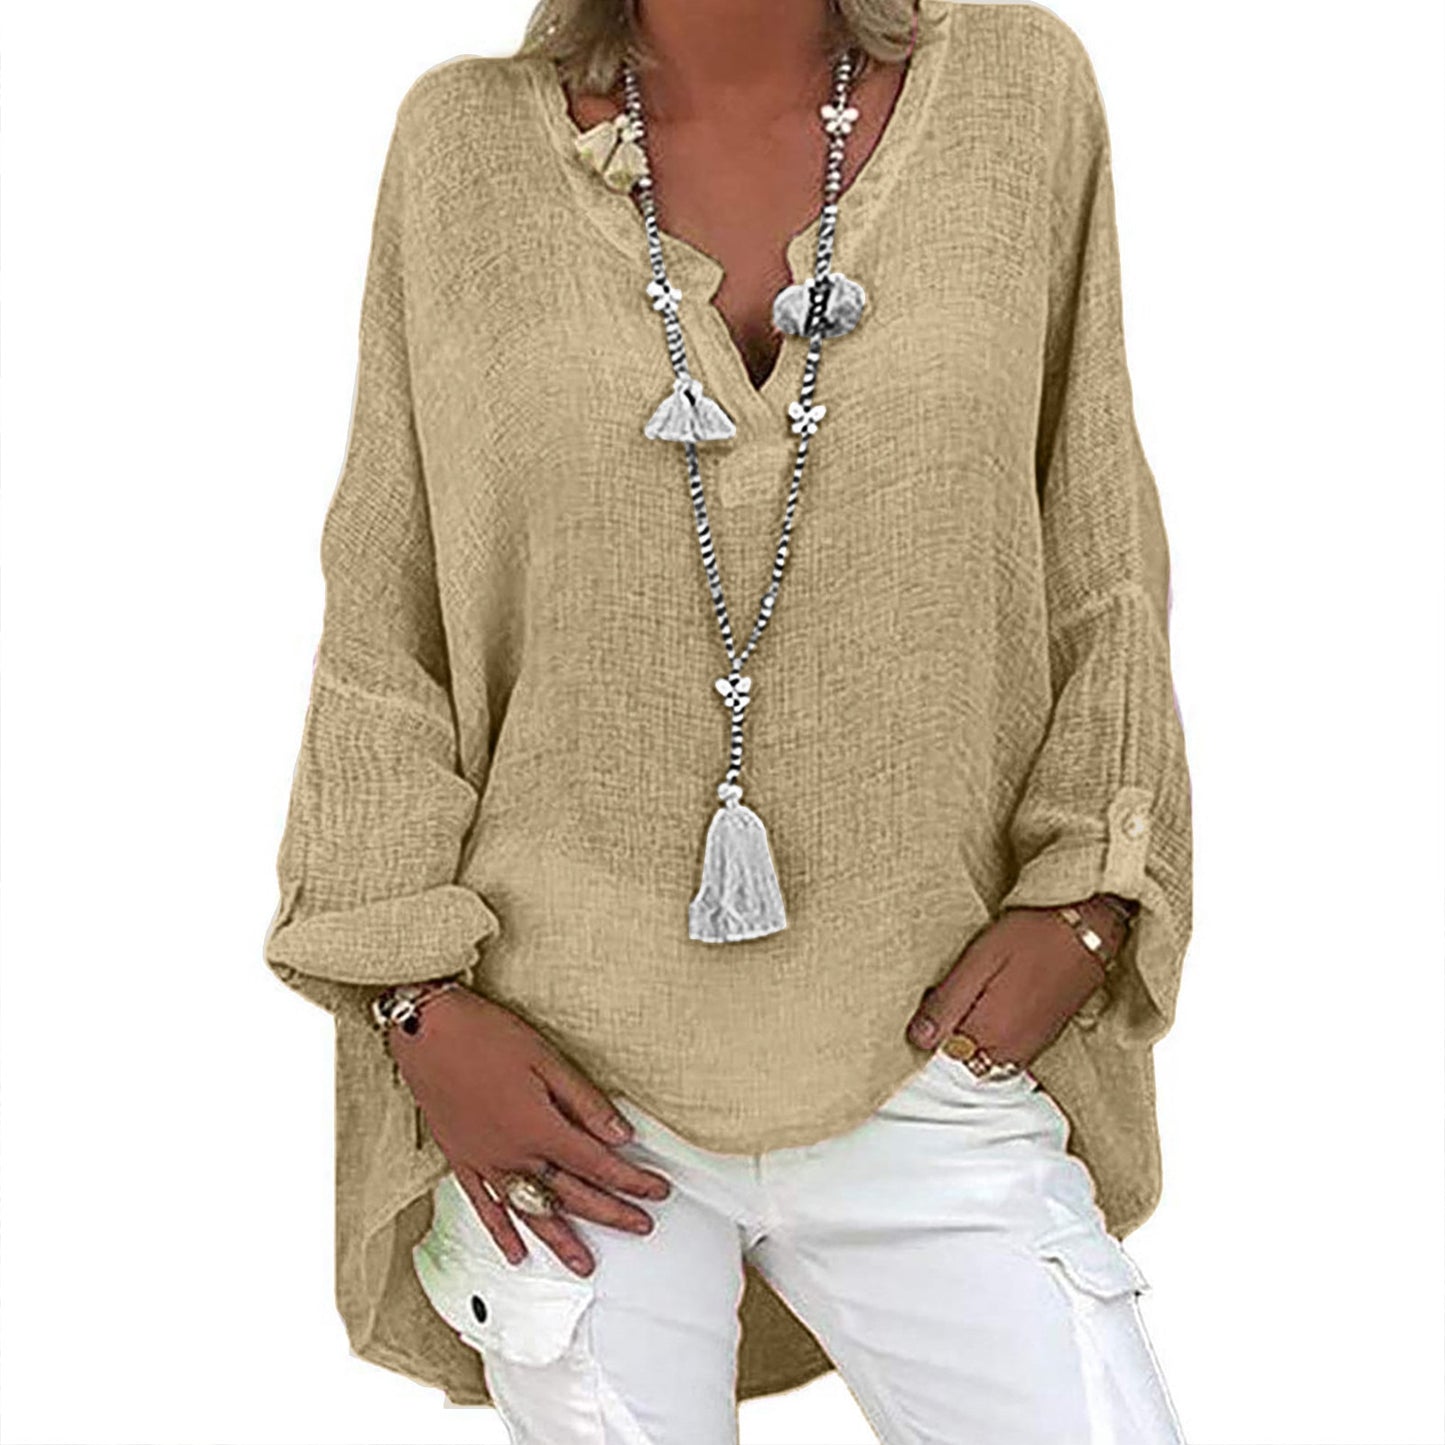 Oversized Casual Women's Tops Blouses Long Sleeve Shirts